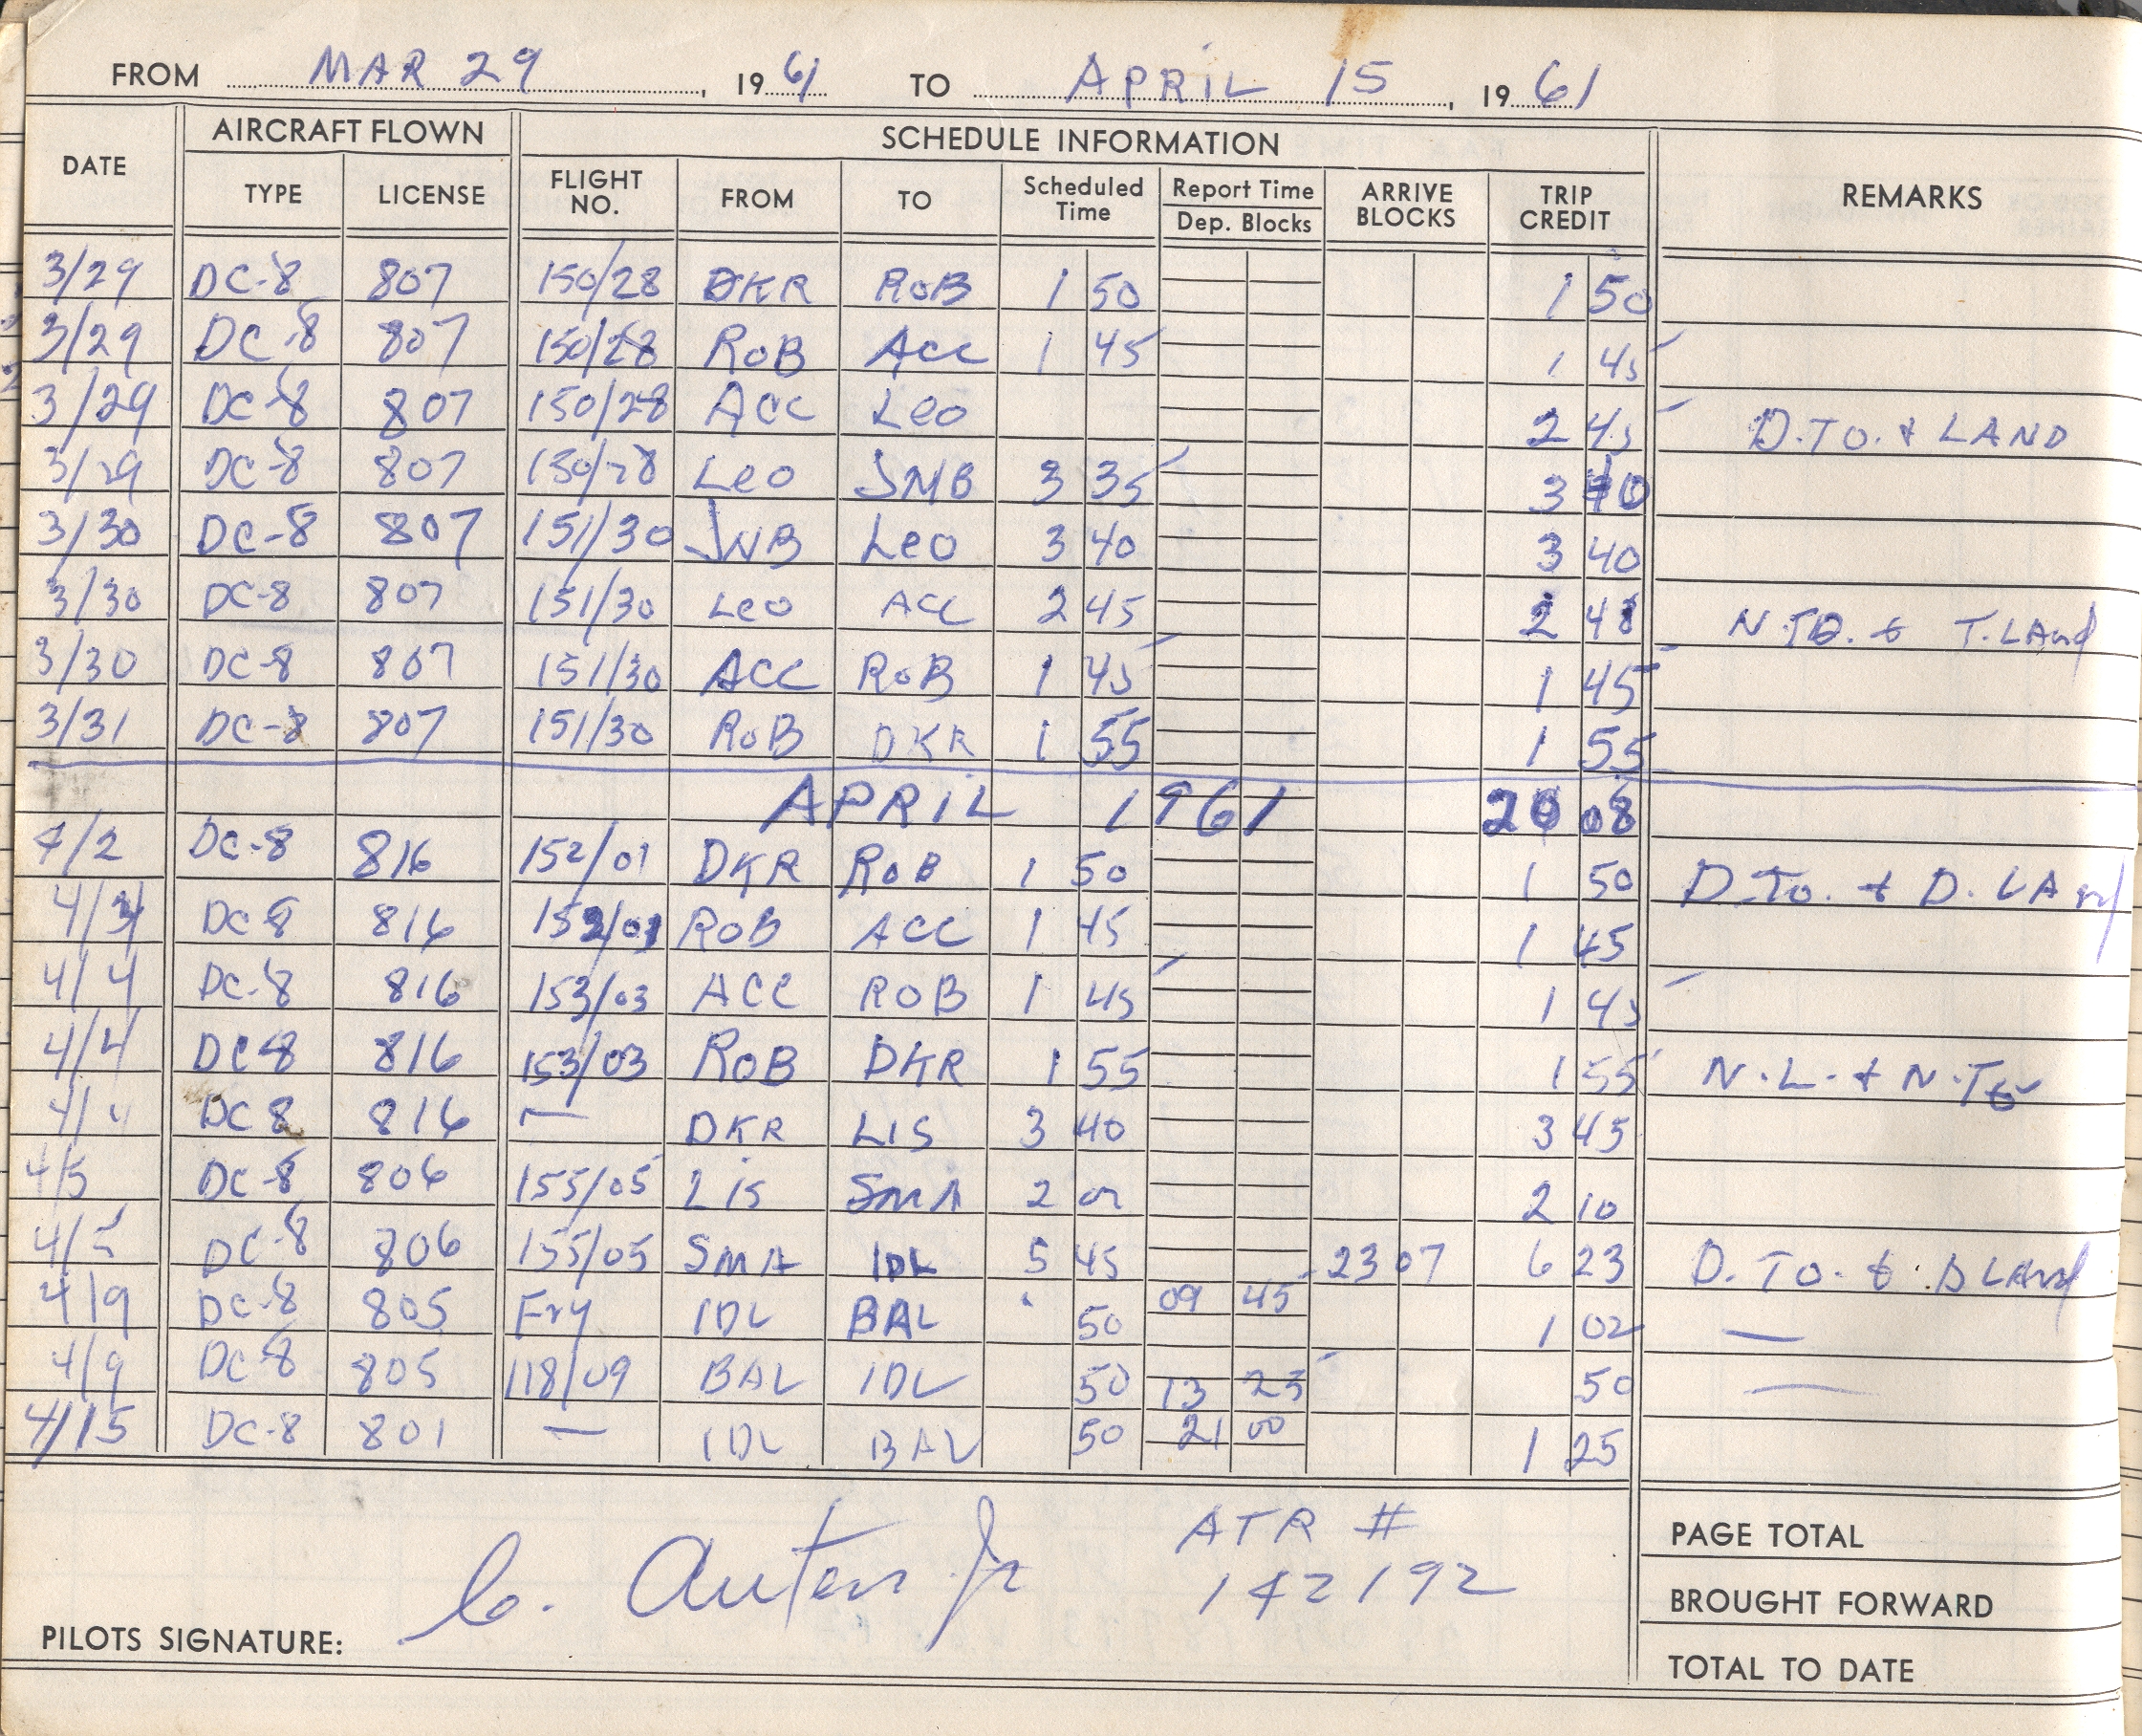 1961 March 29  - April 15 log book page.  This page shows Pan Am service to Africa.